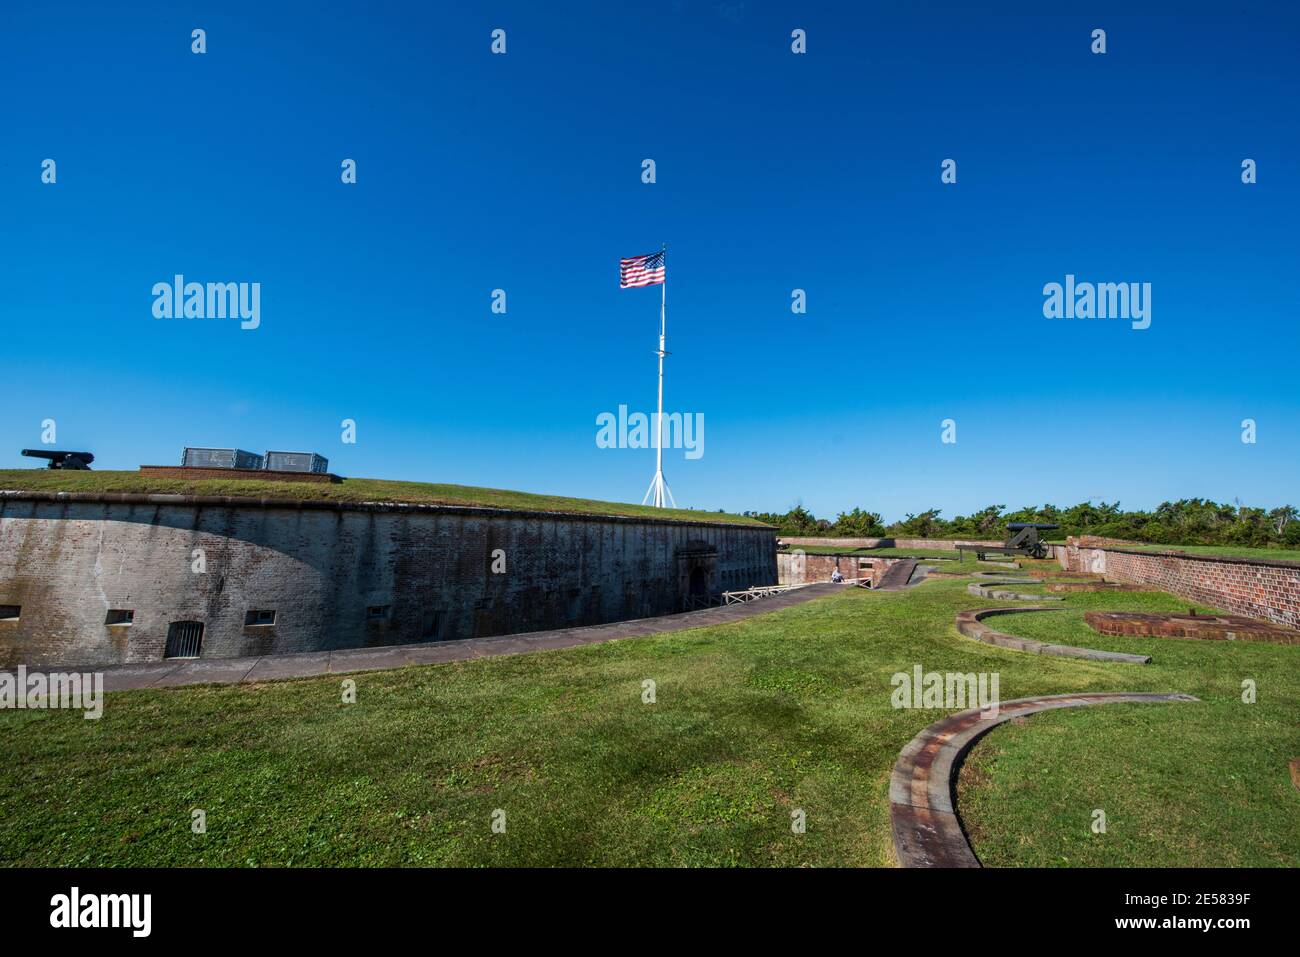 Surrounding Fort Macon's citadel is the sunken area known as the ditch, which was formerly deeper and could be turned into a moat by flooding it with Stock Photo